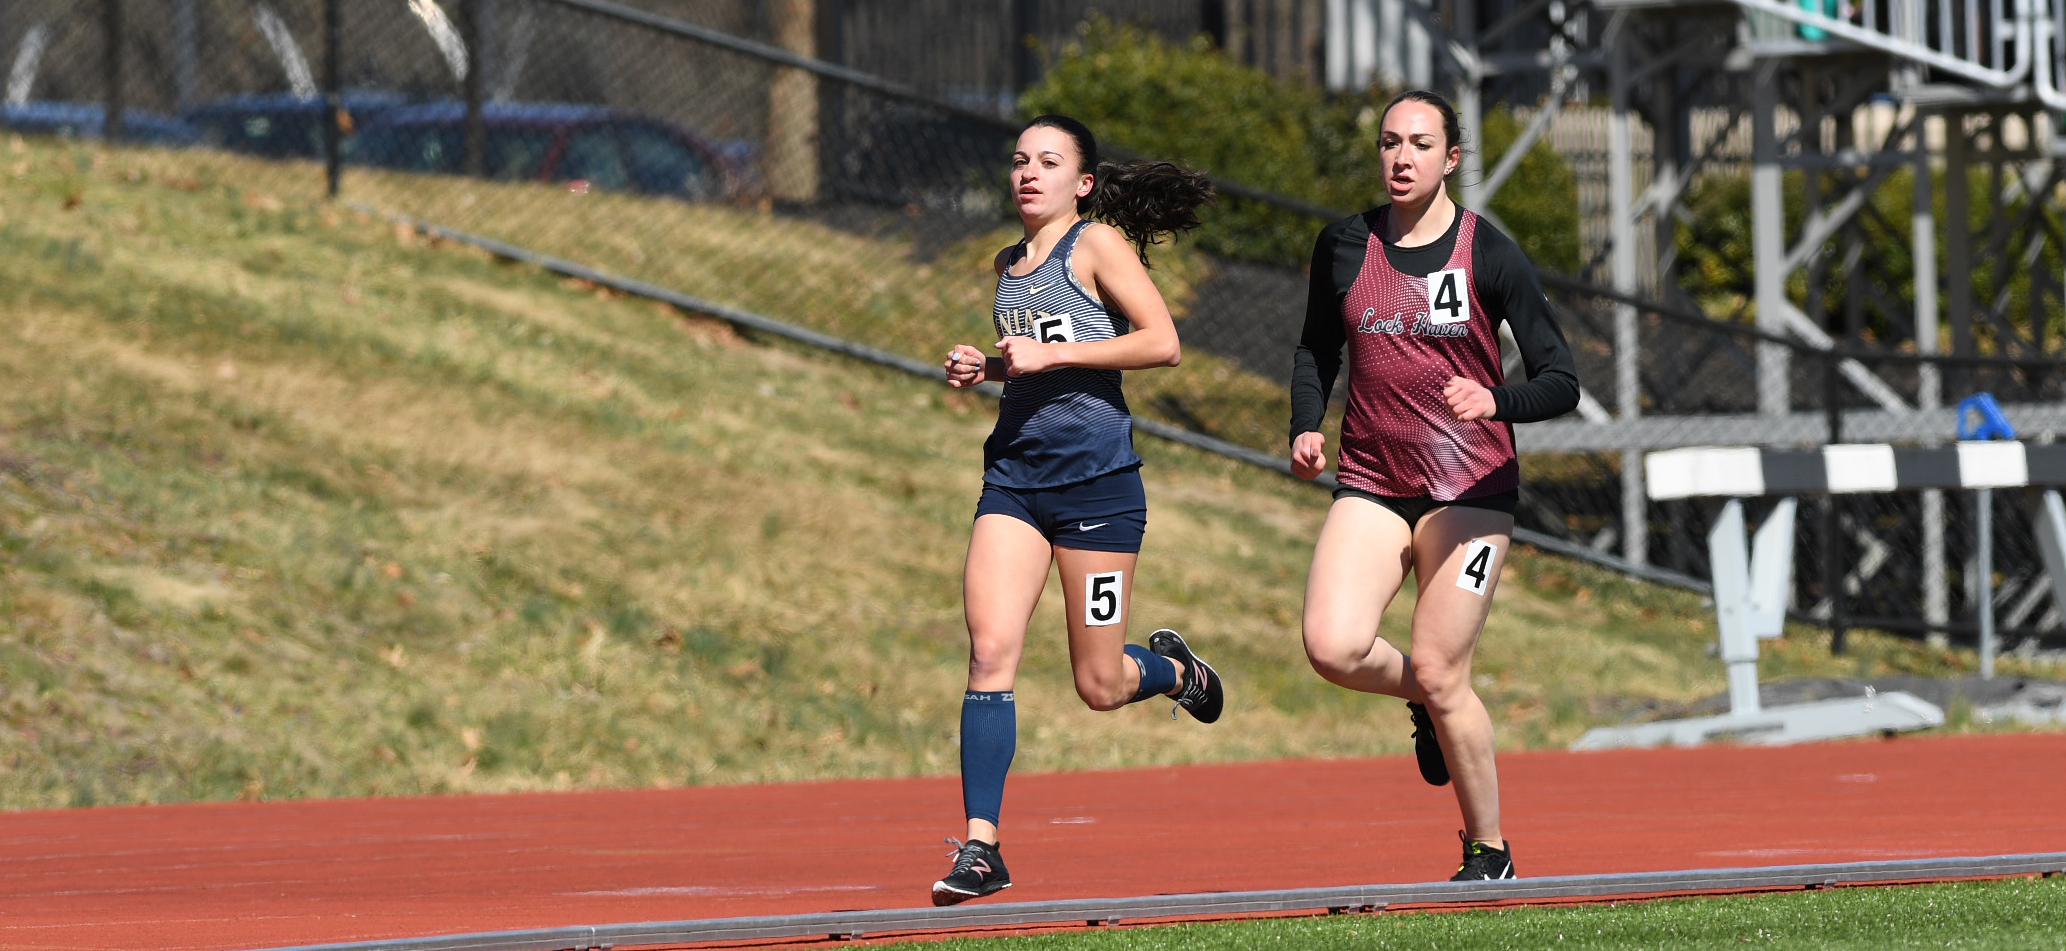 Women's Track and Field Takes Sixth at DuCharme Invitational